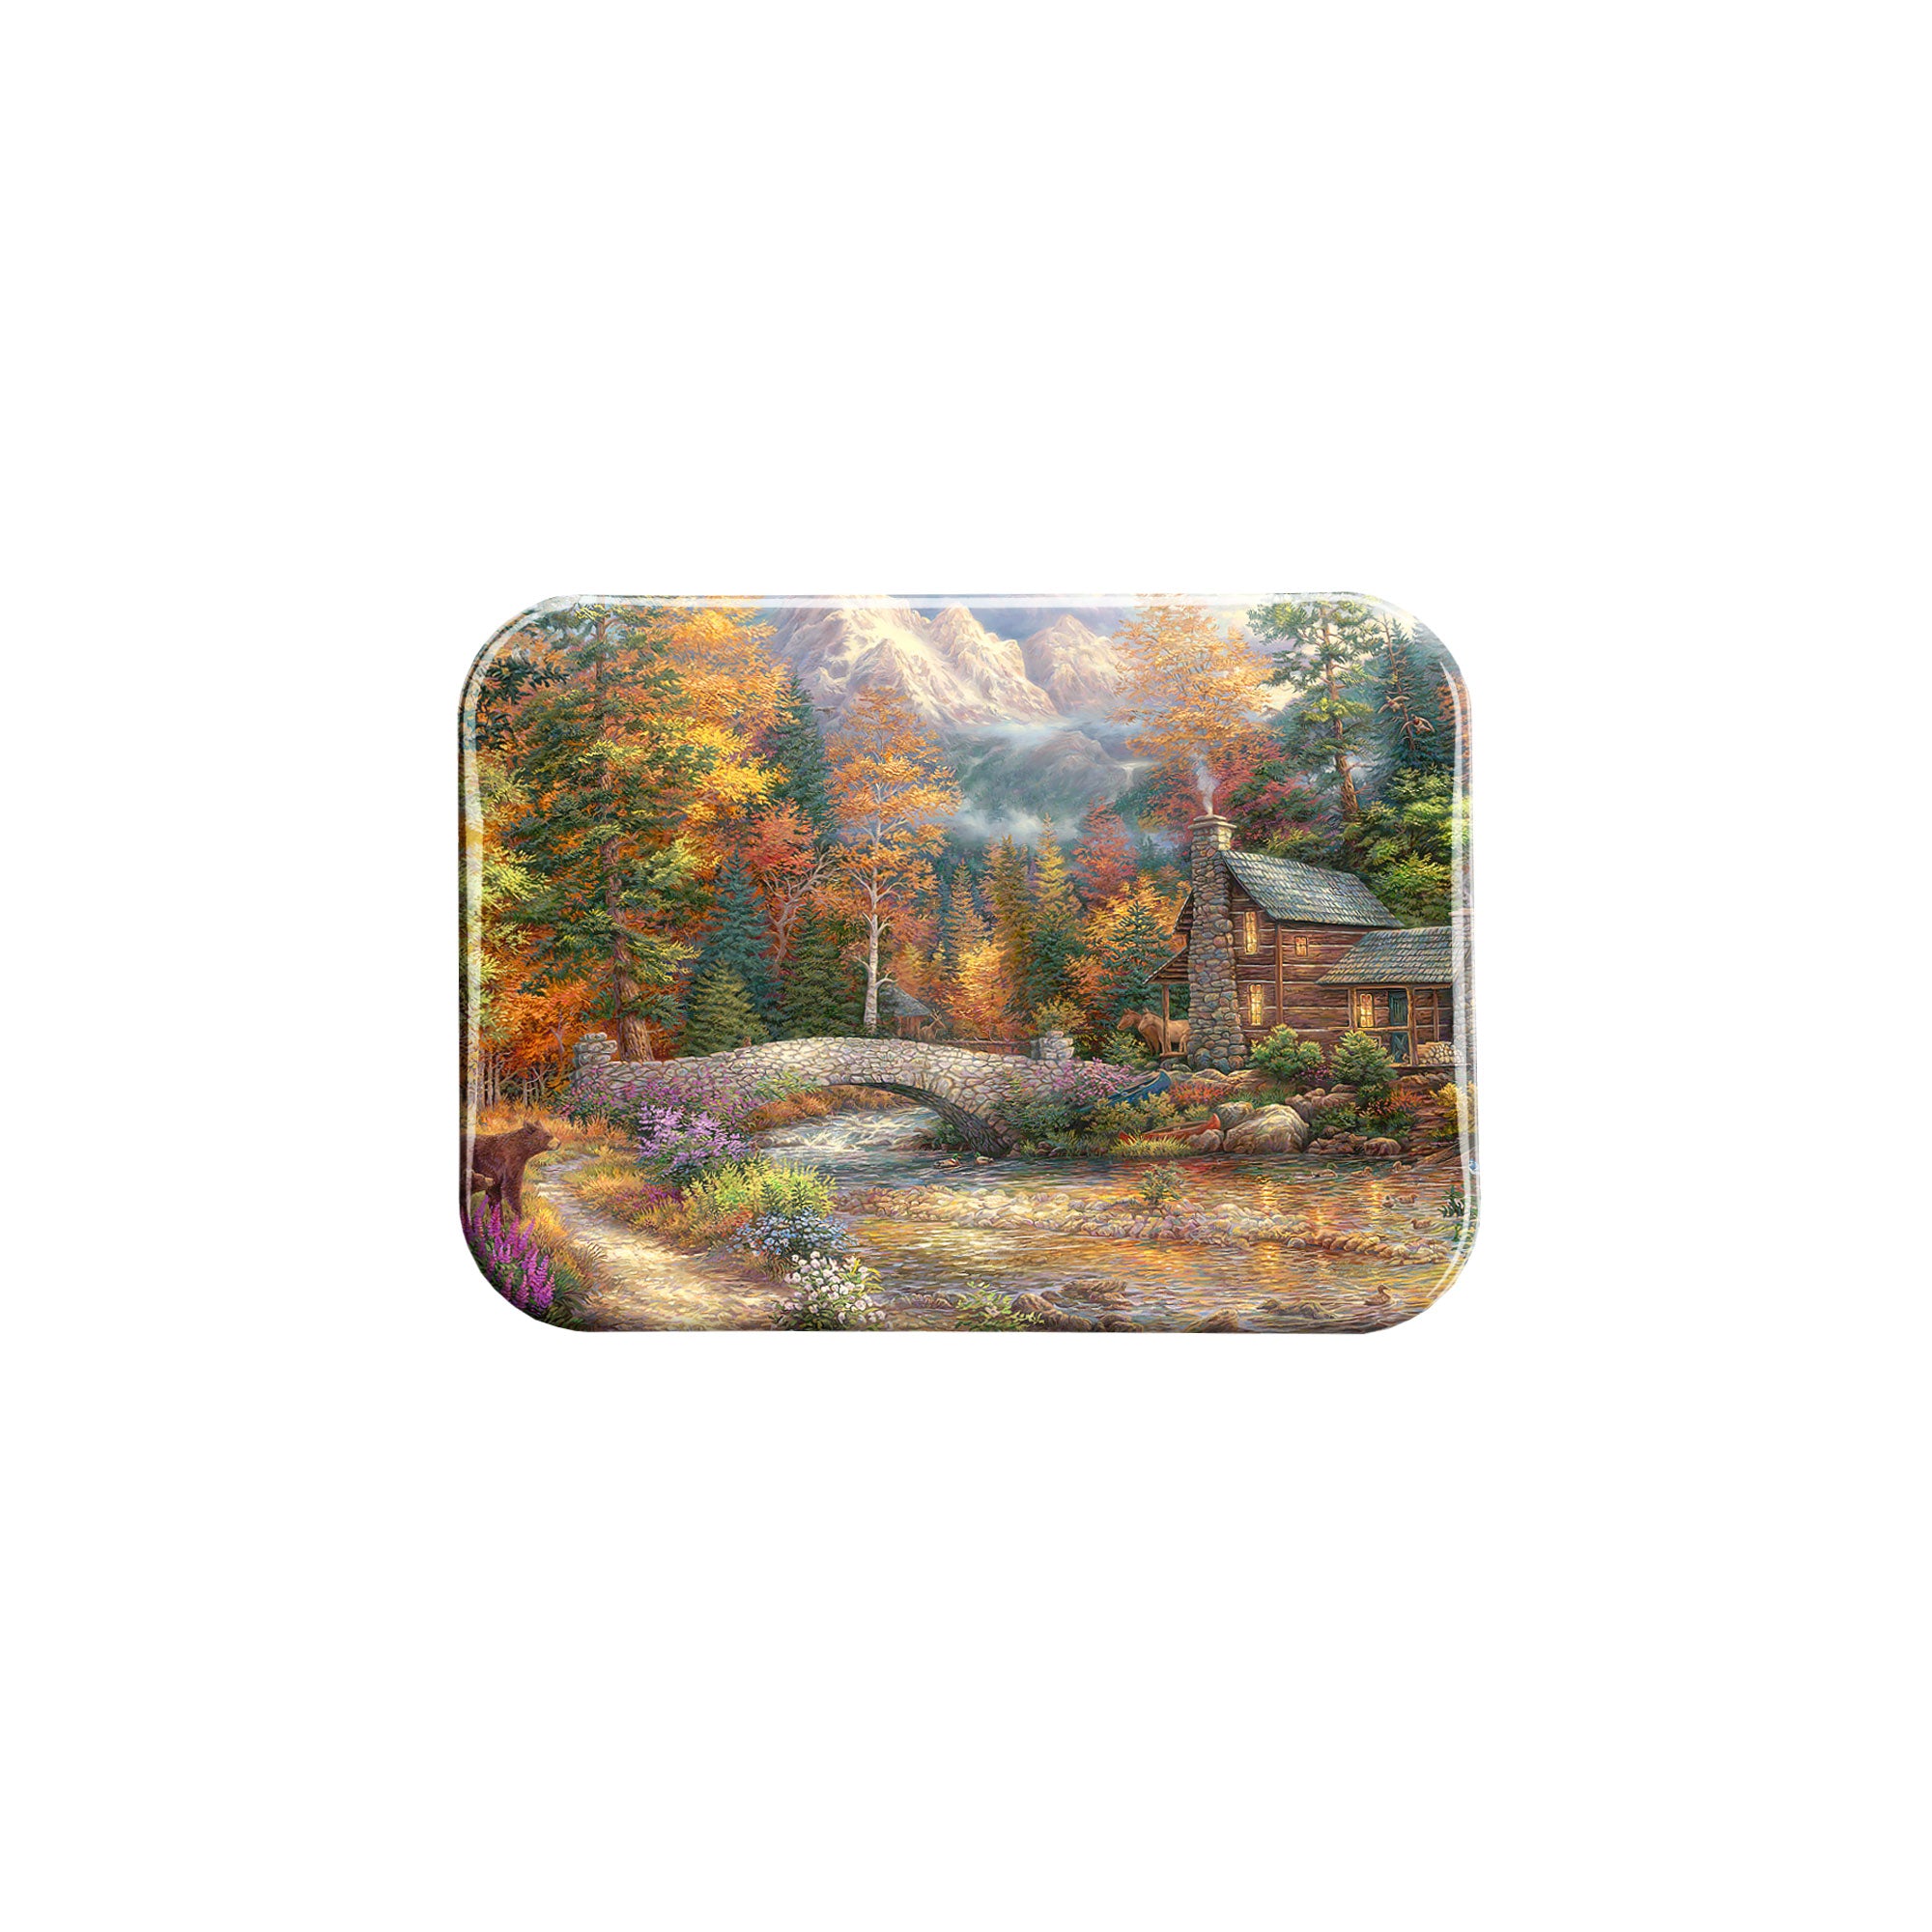 "Call Of The Wild Additions" - 2.5" X 3.5" Rectangle Fridge Magnets